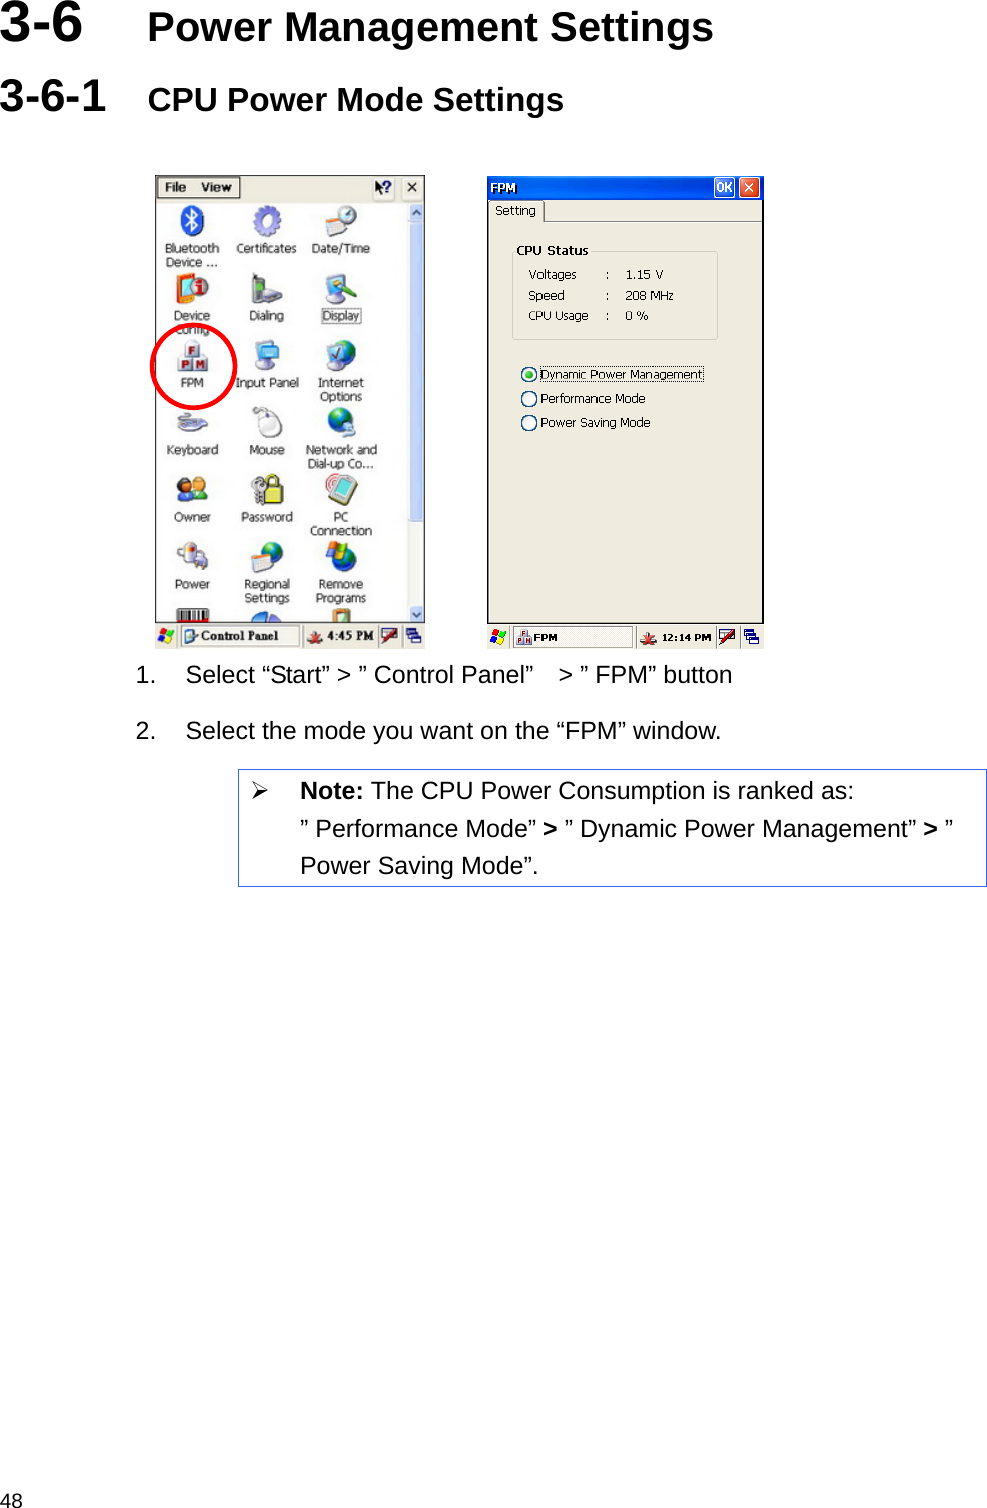  483-6  Power Management Settings 3-6-1  CPU Power Mode Settings         1.  Select “Start” &gt; ” Control Panel”    &gt; ” FPM” button 2.  Select the mode you want on the “FPM” window.  Note: The CPU Power Consumption is ranked as: ” Performance Mode” &gt; ” Dynamic Power Management” &gt; ” Power Saving Mode”.  